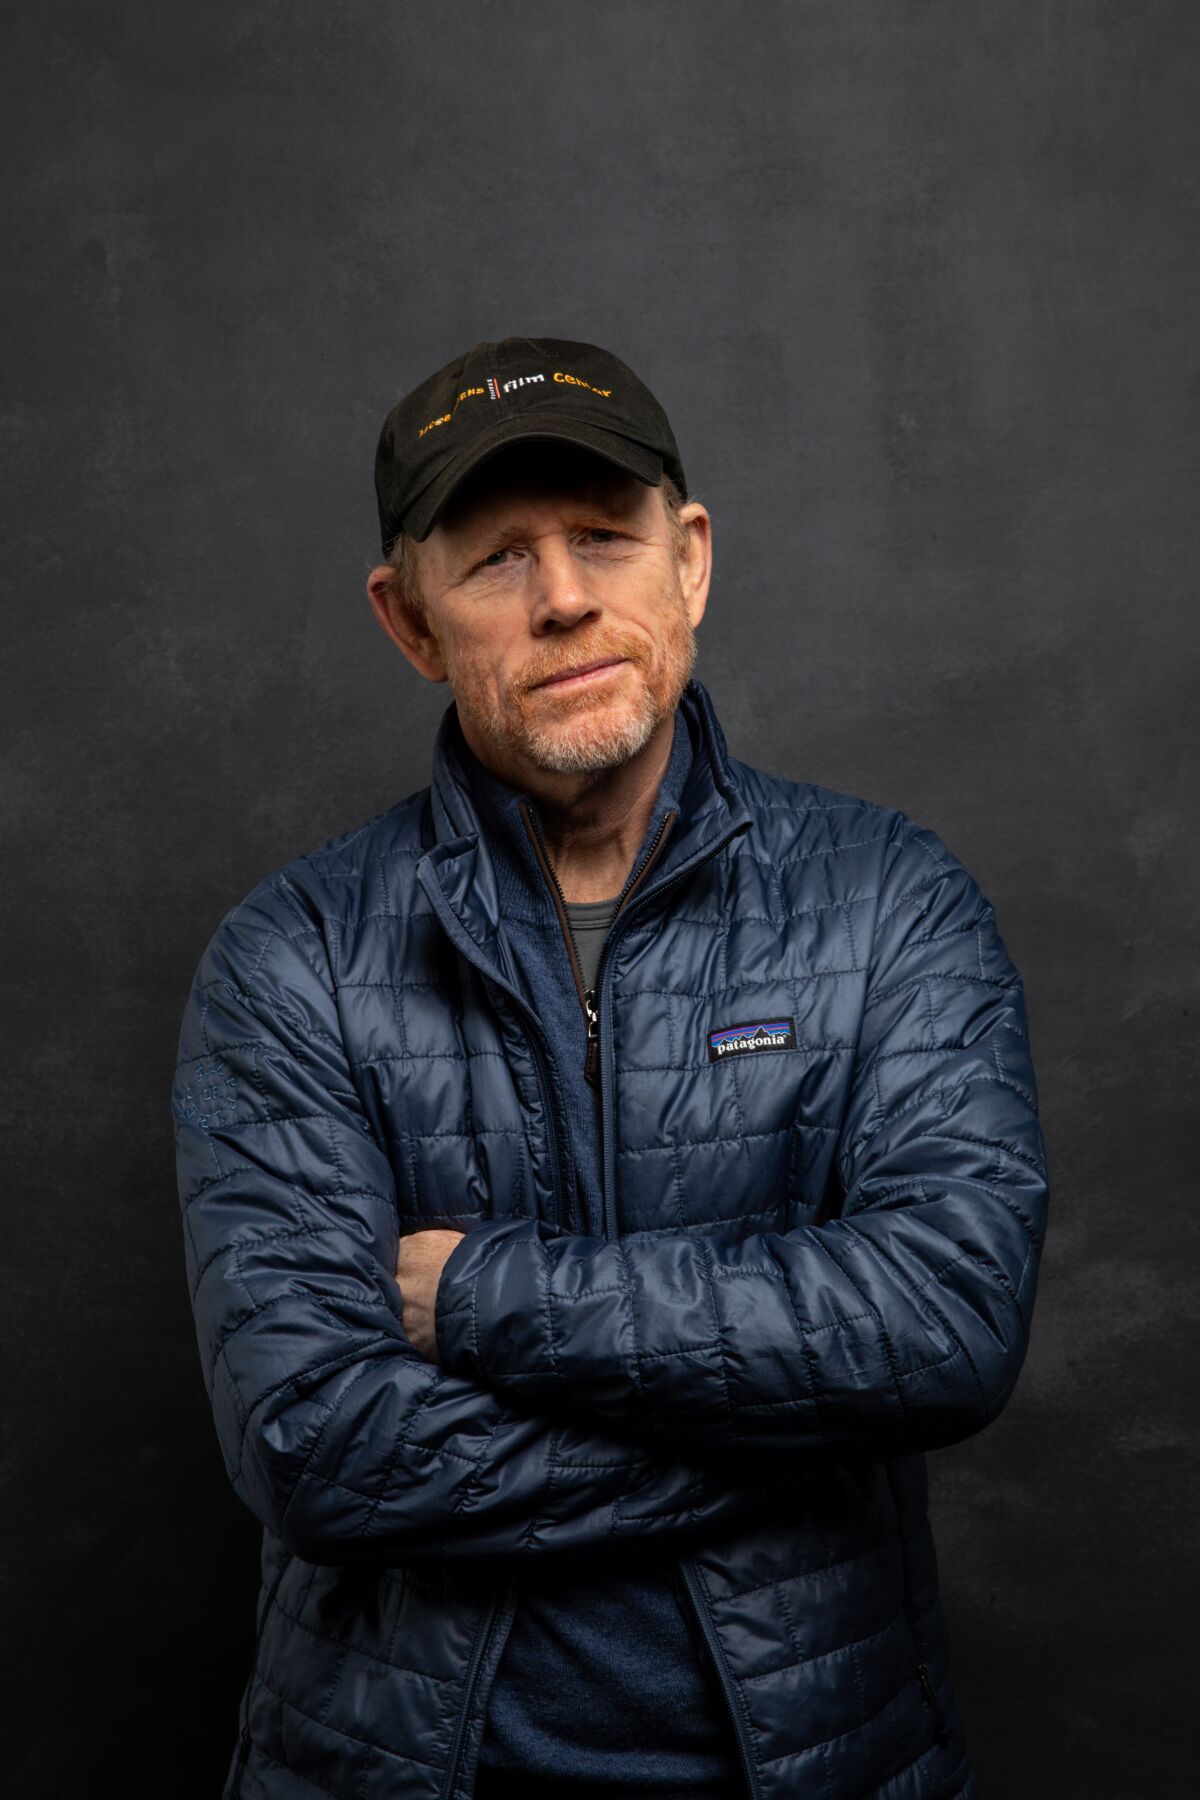 Ron Howard, photographed in the L.A. Times Studio at the Sundance Film Festival in Park City, Utah.